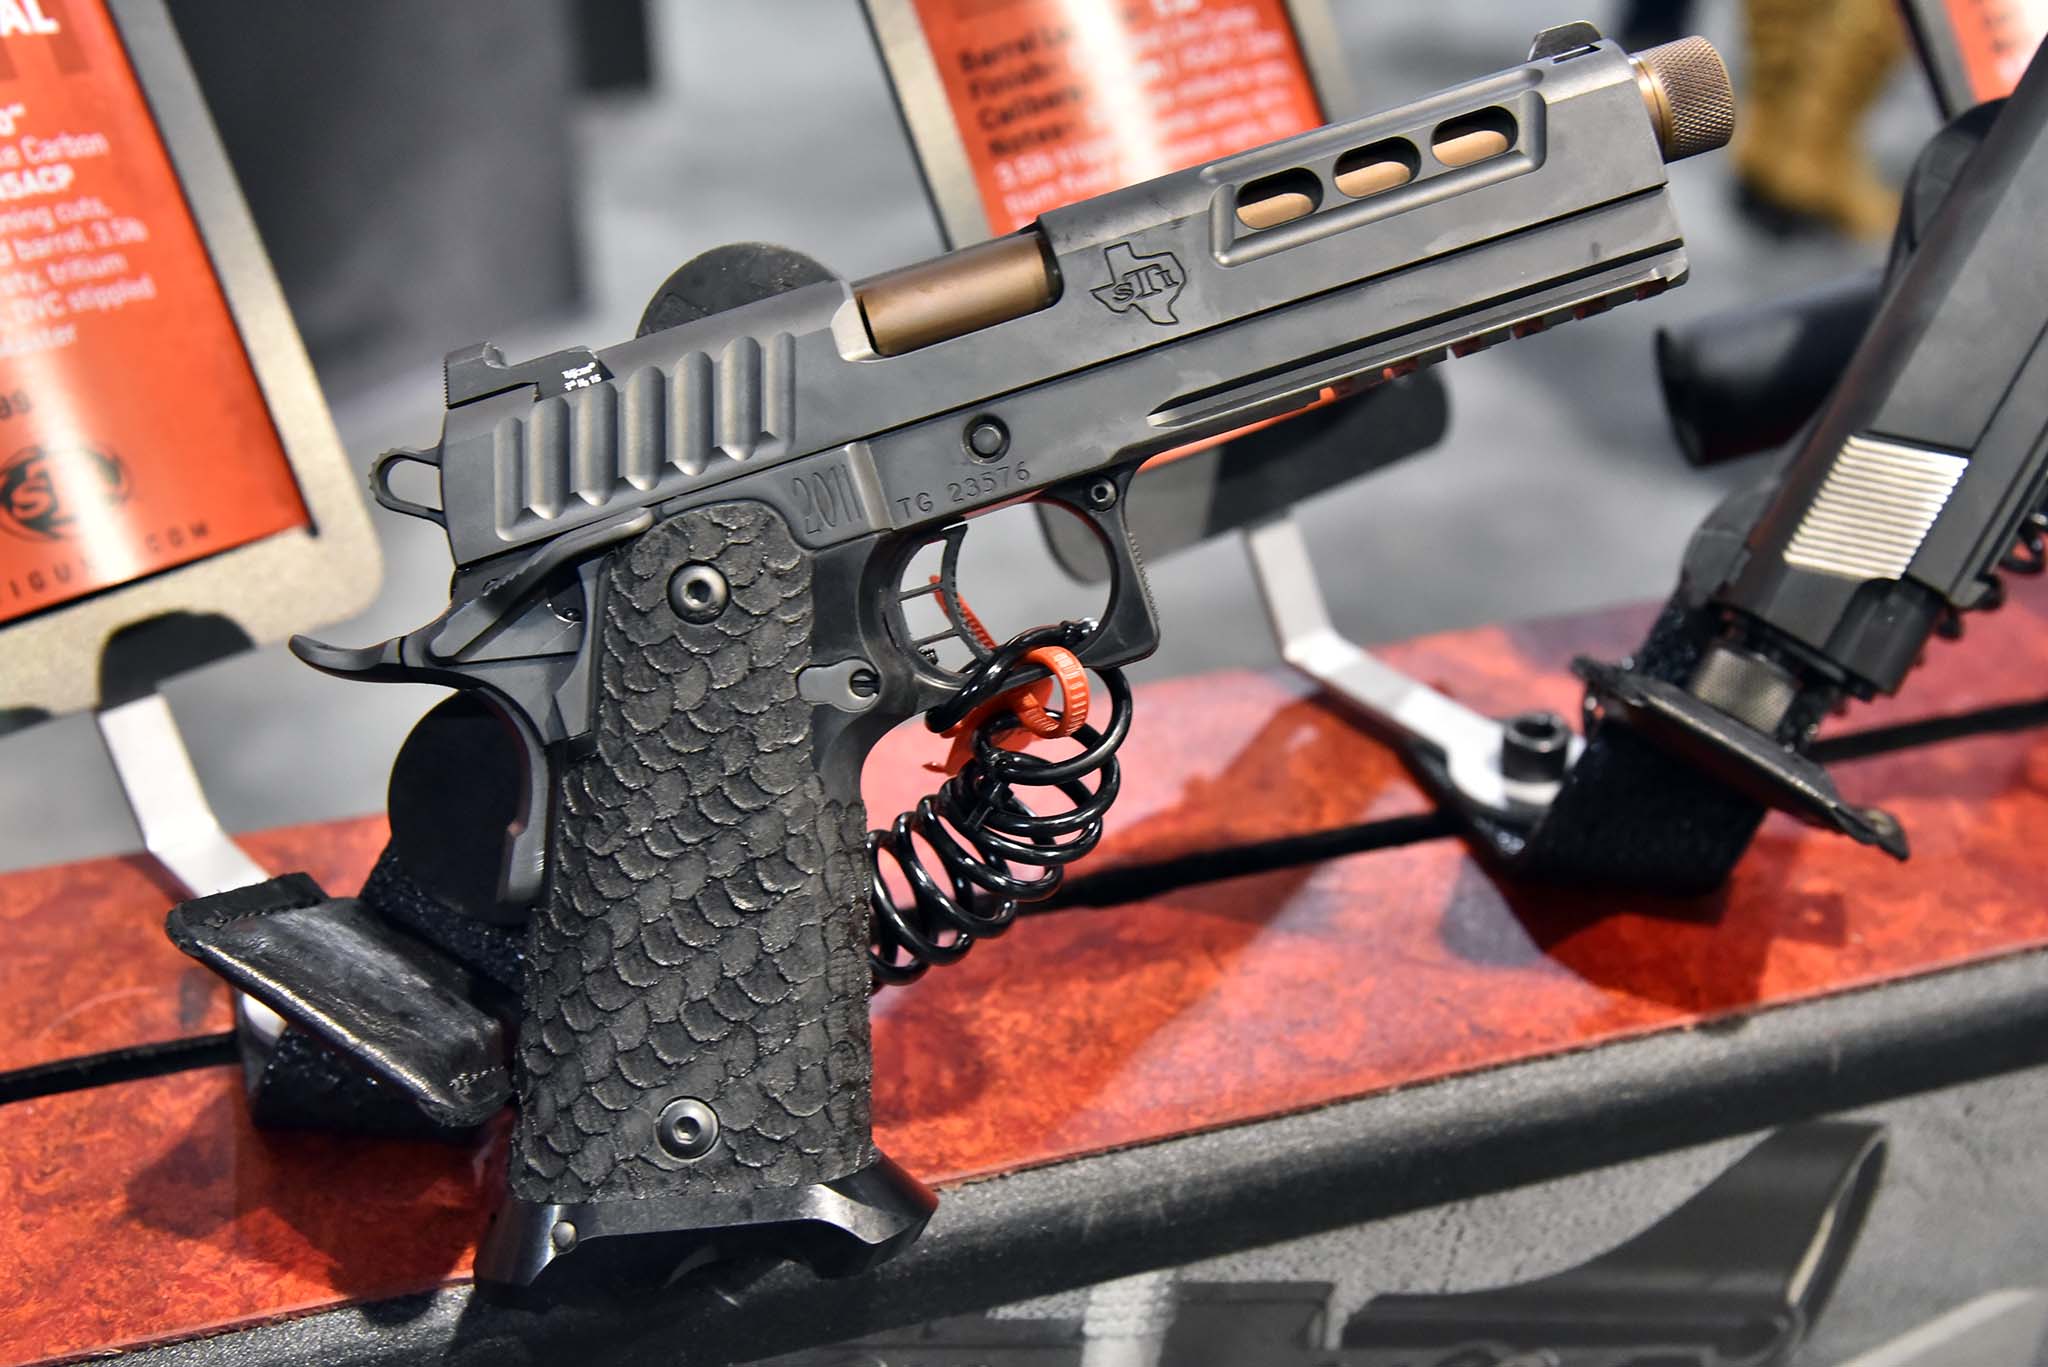 Sti International S New Dvc Series Hex And H O S T Pistols For